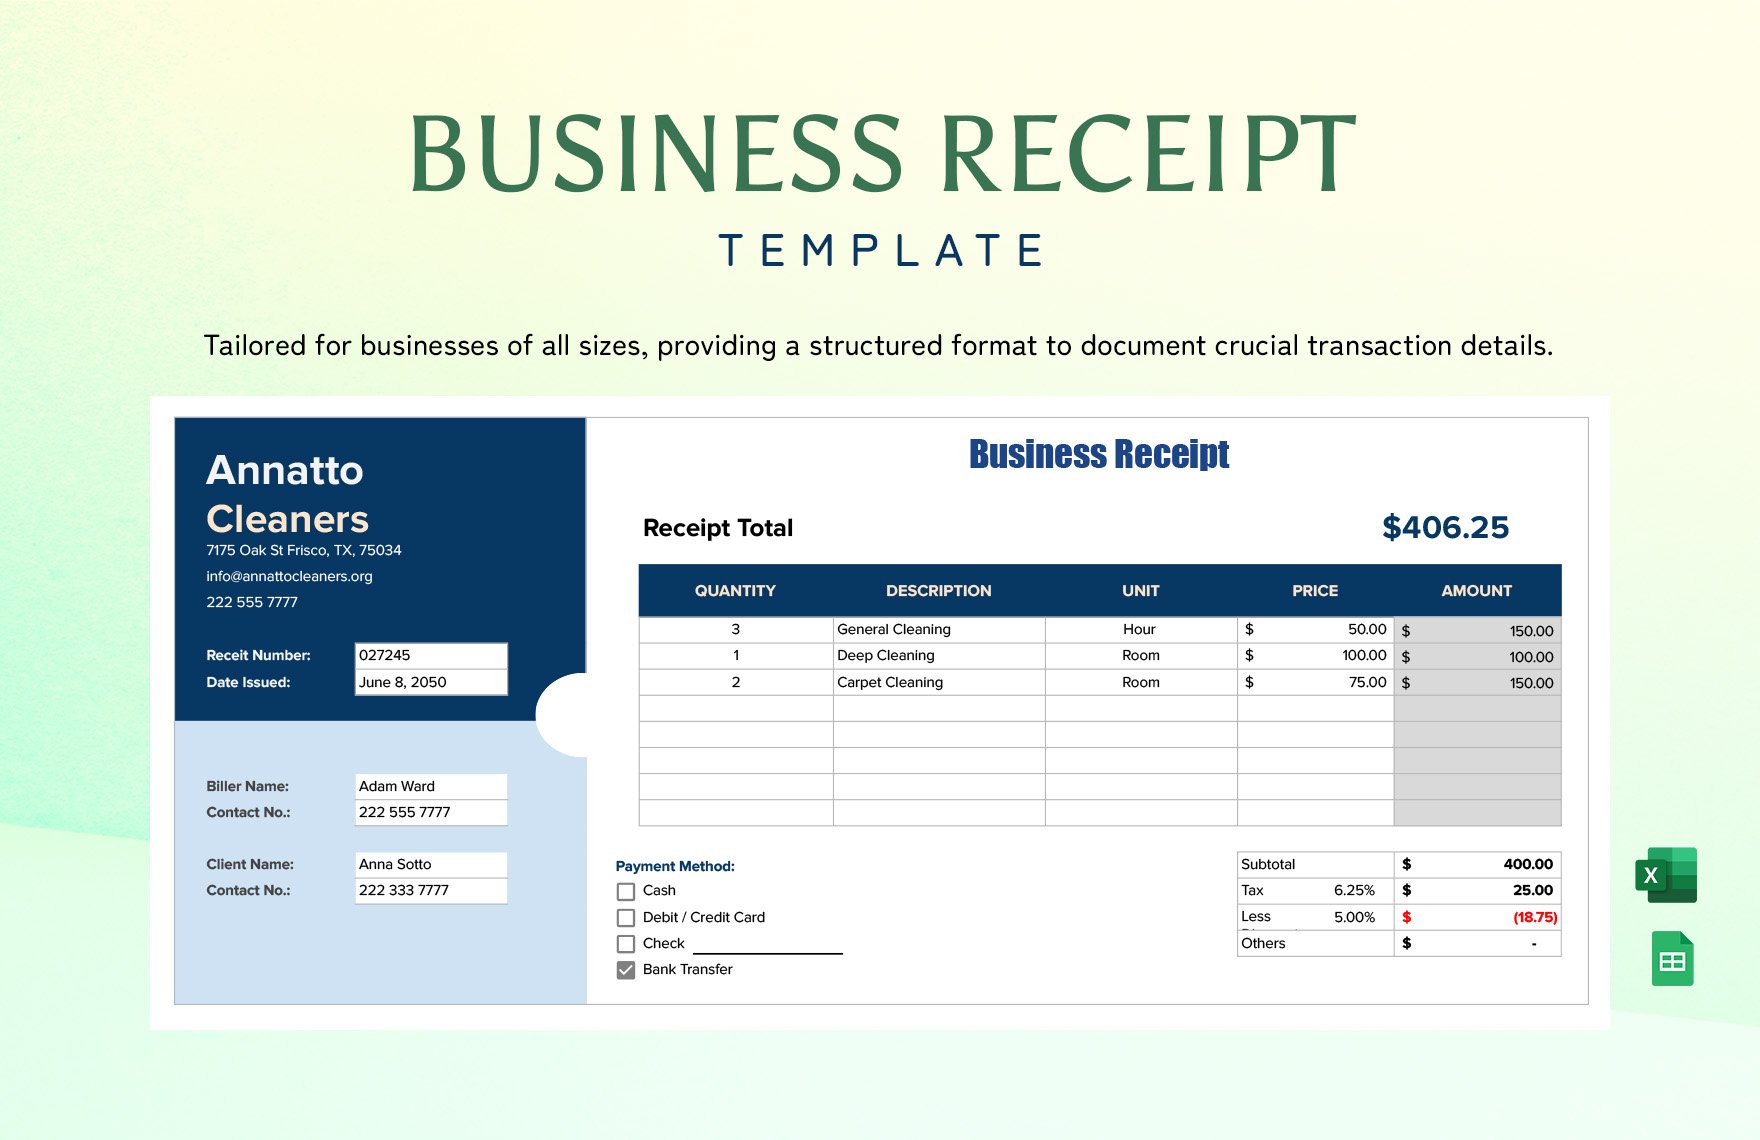 Business Receipt Template in Excel, Google Sheets